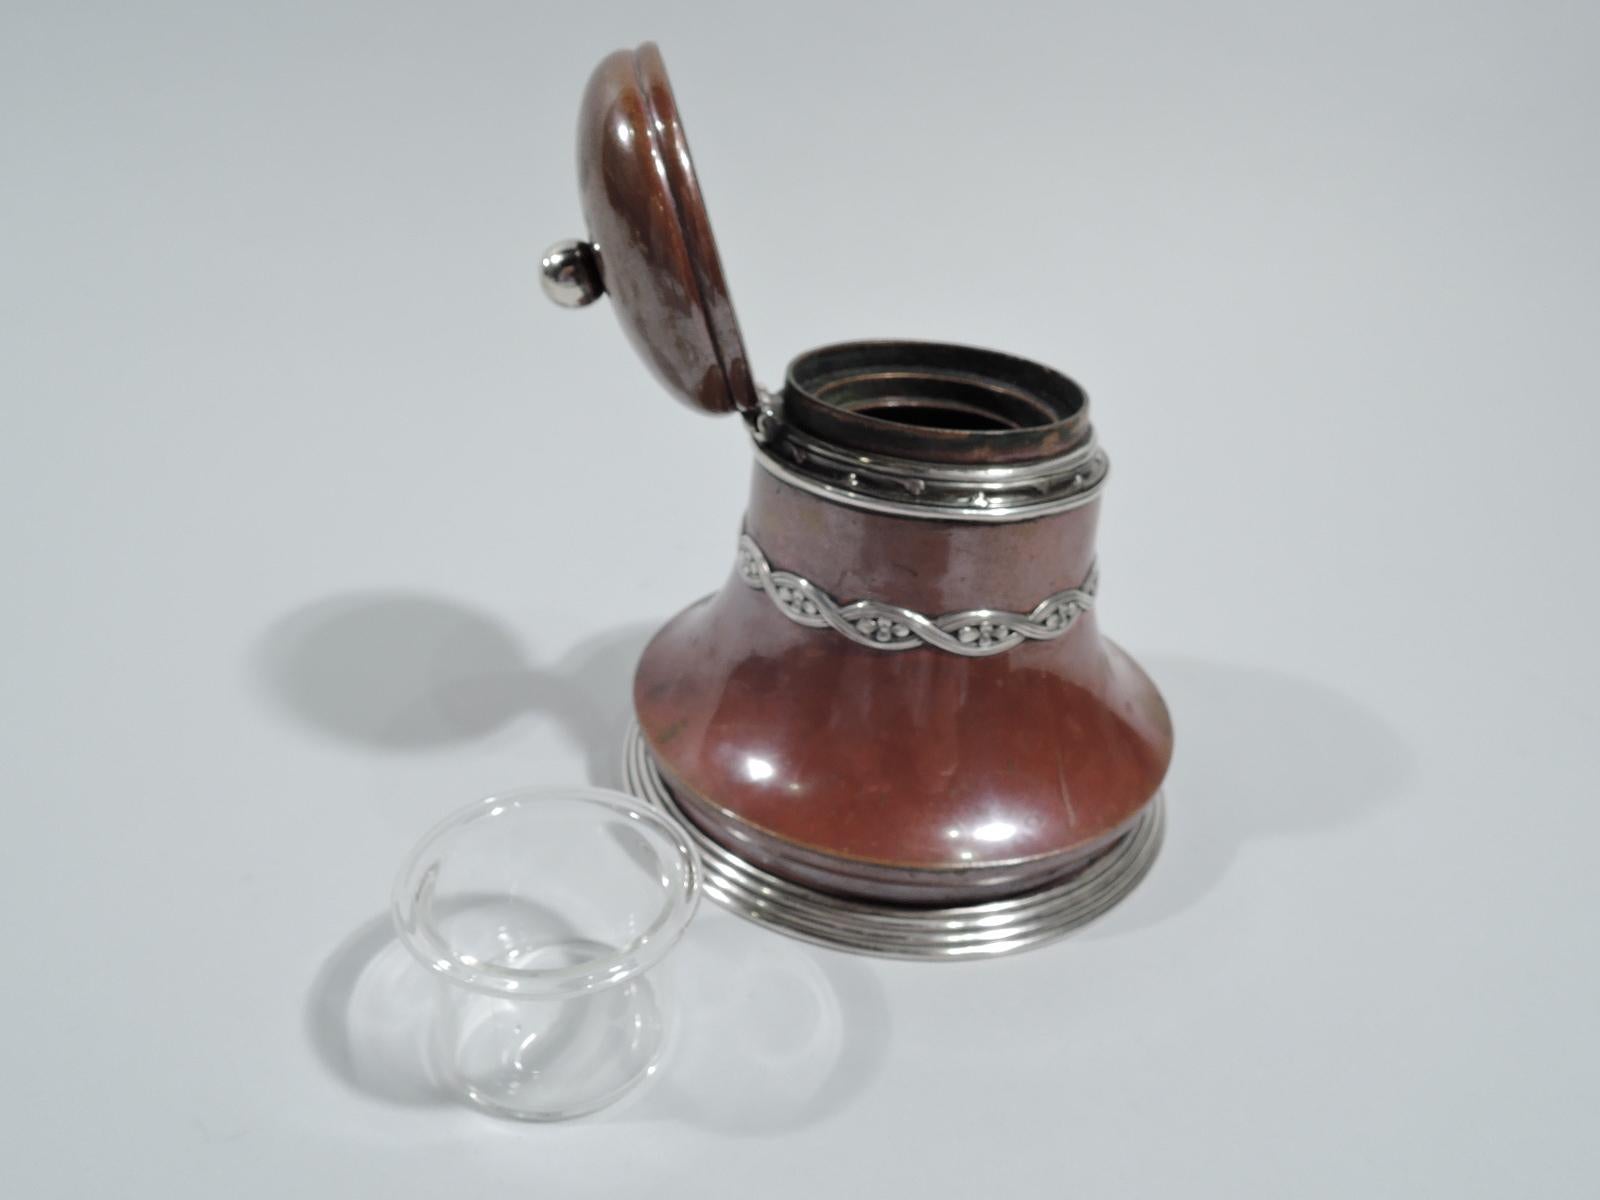 Aesthetic mixed inkwell. Made by Tiffany & Co. in New York. Bell-form copper body with reeded silver foot rim. Applied silver ornament including flower-inset guilloche band and tendril border at neck. Cover hinged and domed with silver ball finial.